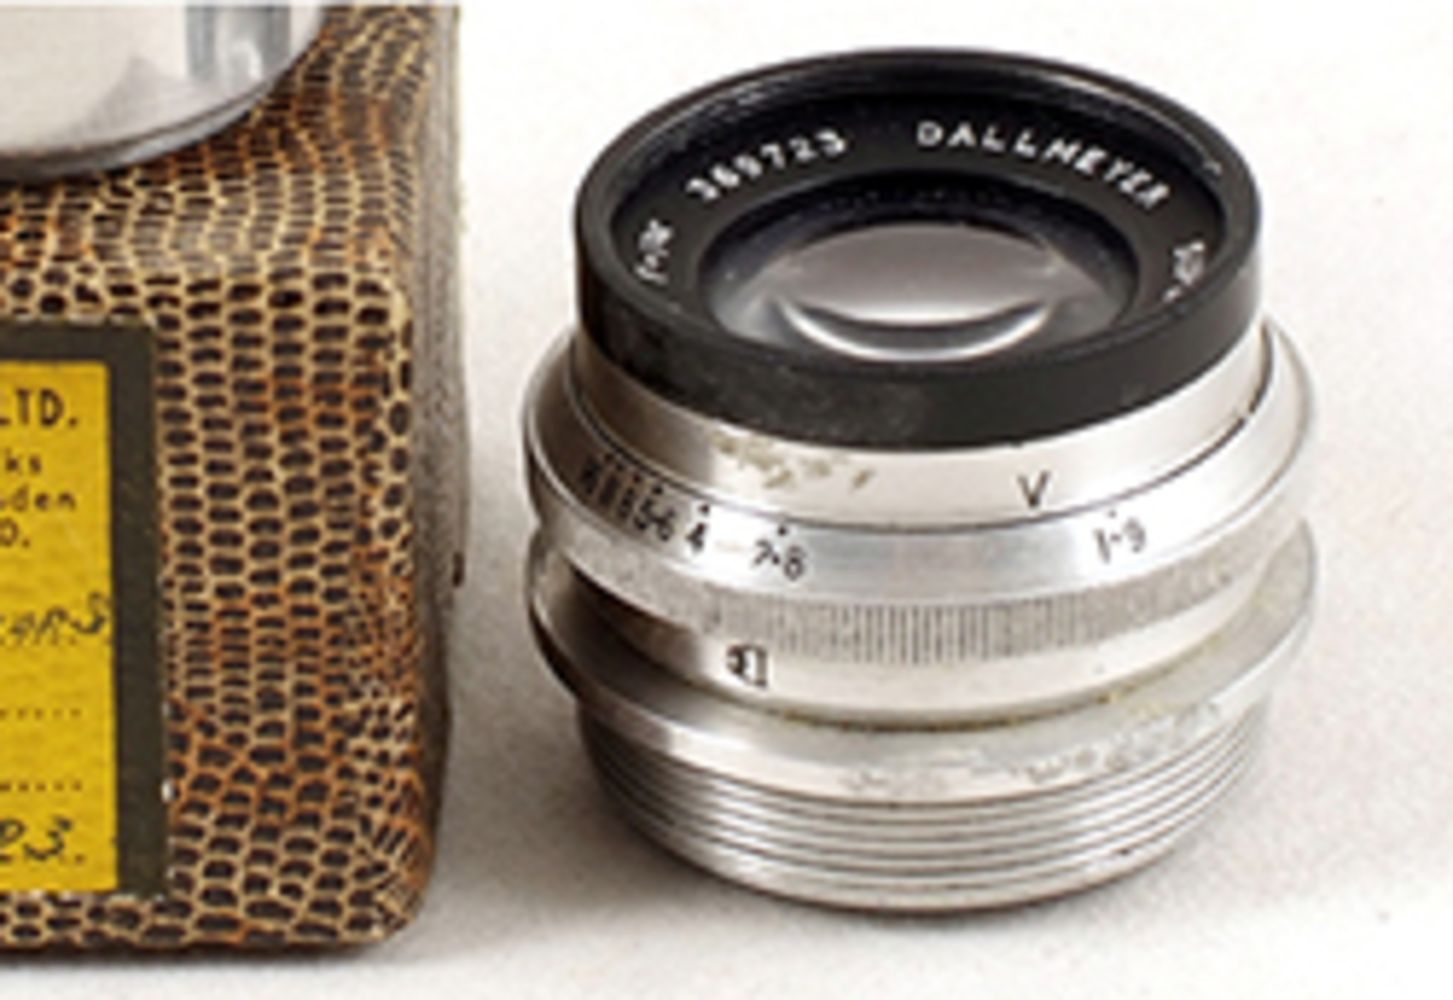 CAMERAS & PHOTOGRAPHIC EQUIPMENT AUCTION including Part 1 of the Bob White Collection